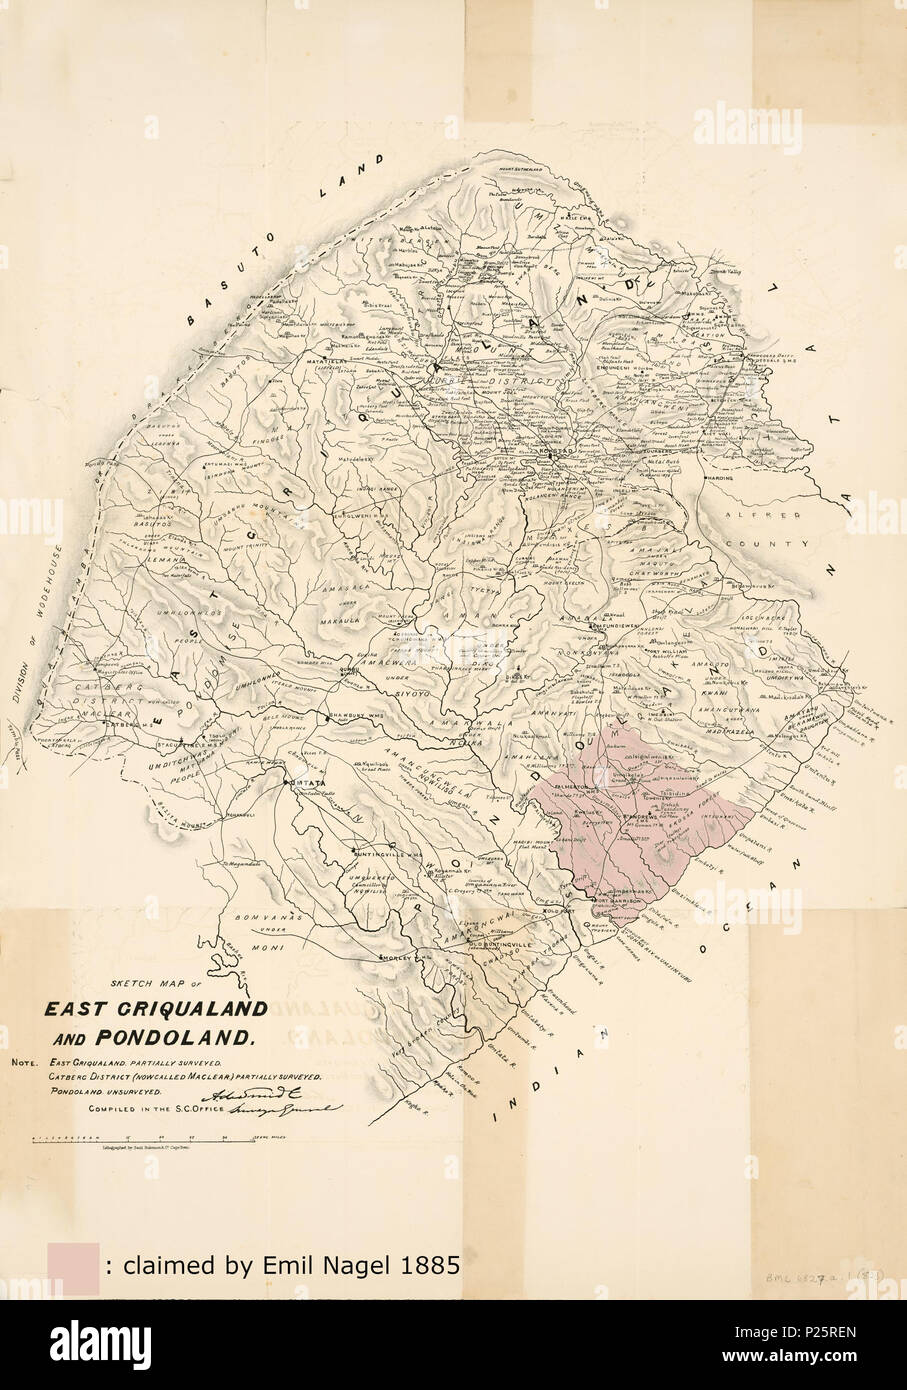 . English: 'Topographical map of East Griqualand and Pondoland from the Umtentwana River to the Kogha River on the Indian Ocean coast and to the borders with the Division of Wodehouse and Basutoland in the hinterland. The map shows towns, mission stations, the location of African clans, kraals, rivers and mountains.' (Description by the University of Cape Town) Subsequently, the concession area was marked, which negotiated Emil Nagel 1885 with the Pondo chiefs Umhlangaso and Umquikela. Deutsch: 'Topographische Karte von East Griqualand und Pondoland vom Umtentwana-Fluss bis zum Kogha-Fluss an  Stock Photo